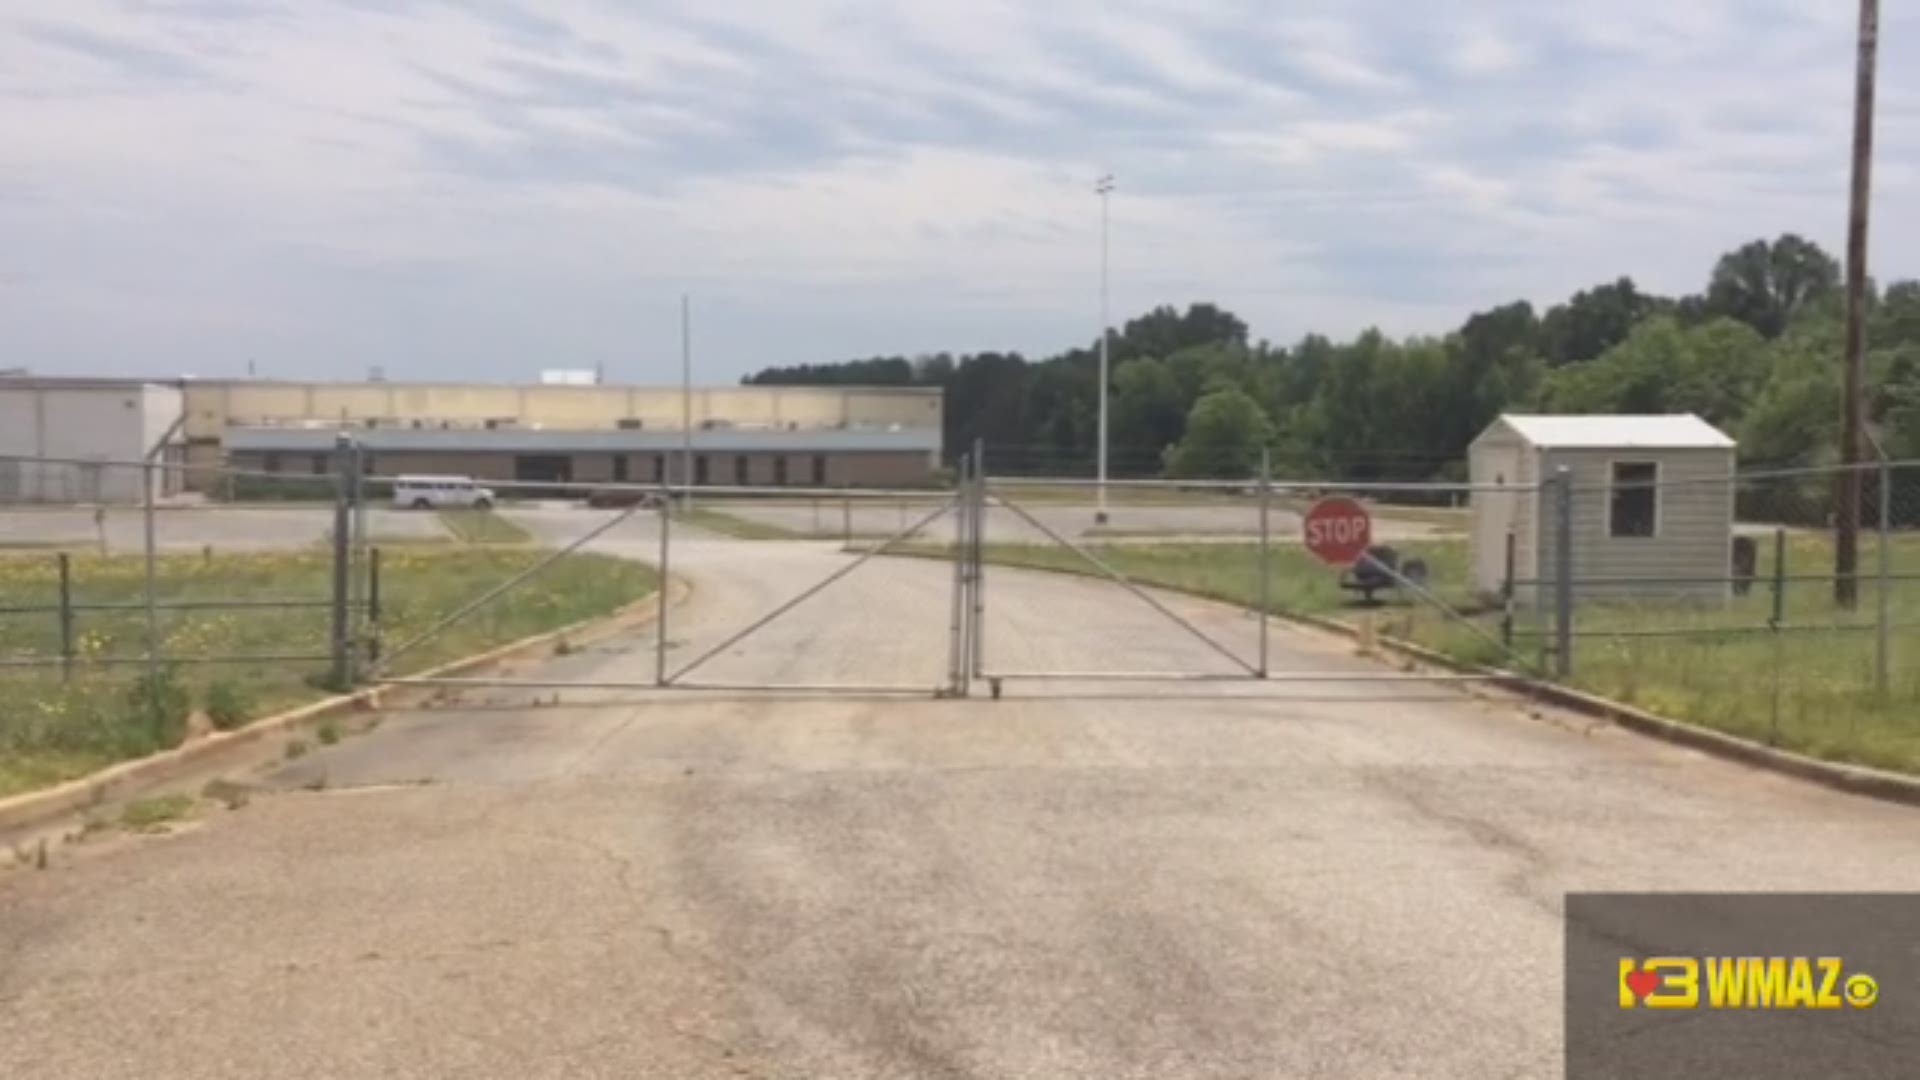 1,000 new jobs are coming to Milledgeville. That's according to Gov. Nathan Deal. He says Sparta Industries will move into the former Rheem Plant and manufacture foam insulation there.